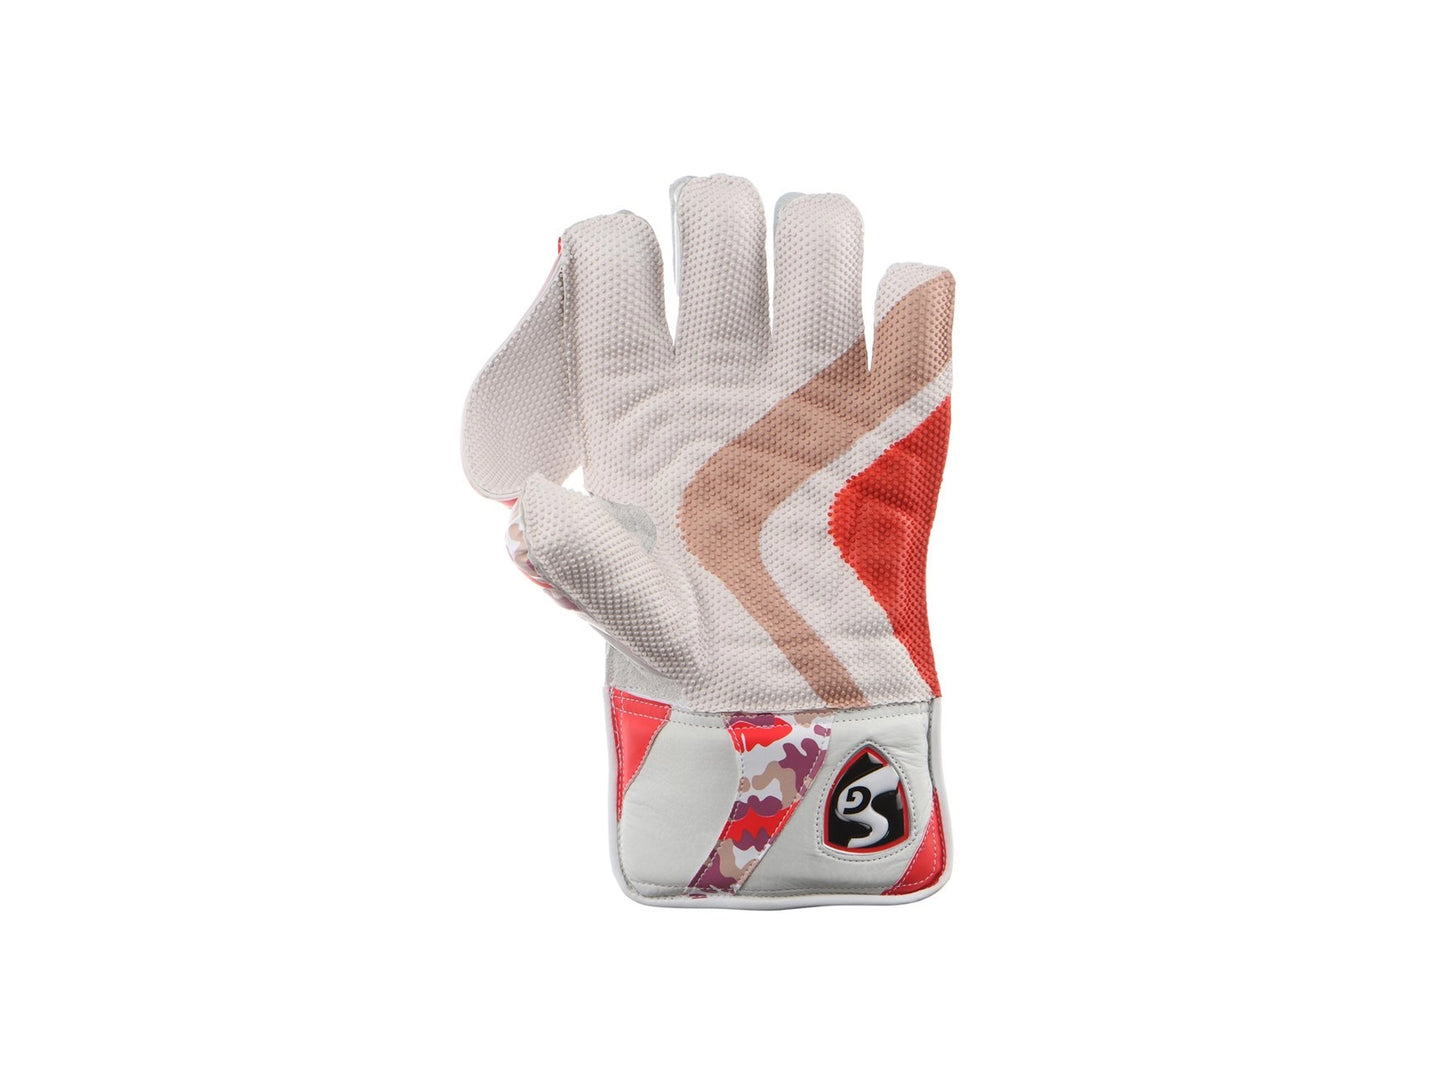 SG Test Wicket Keeping Gloves